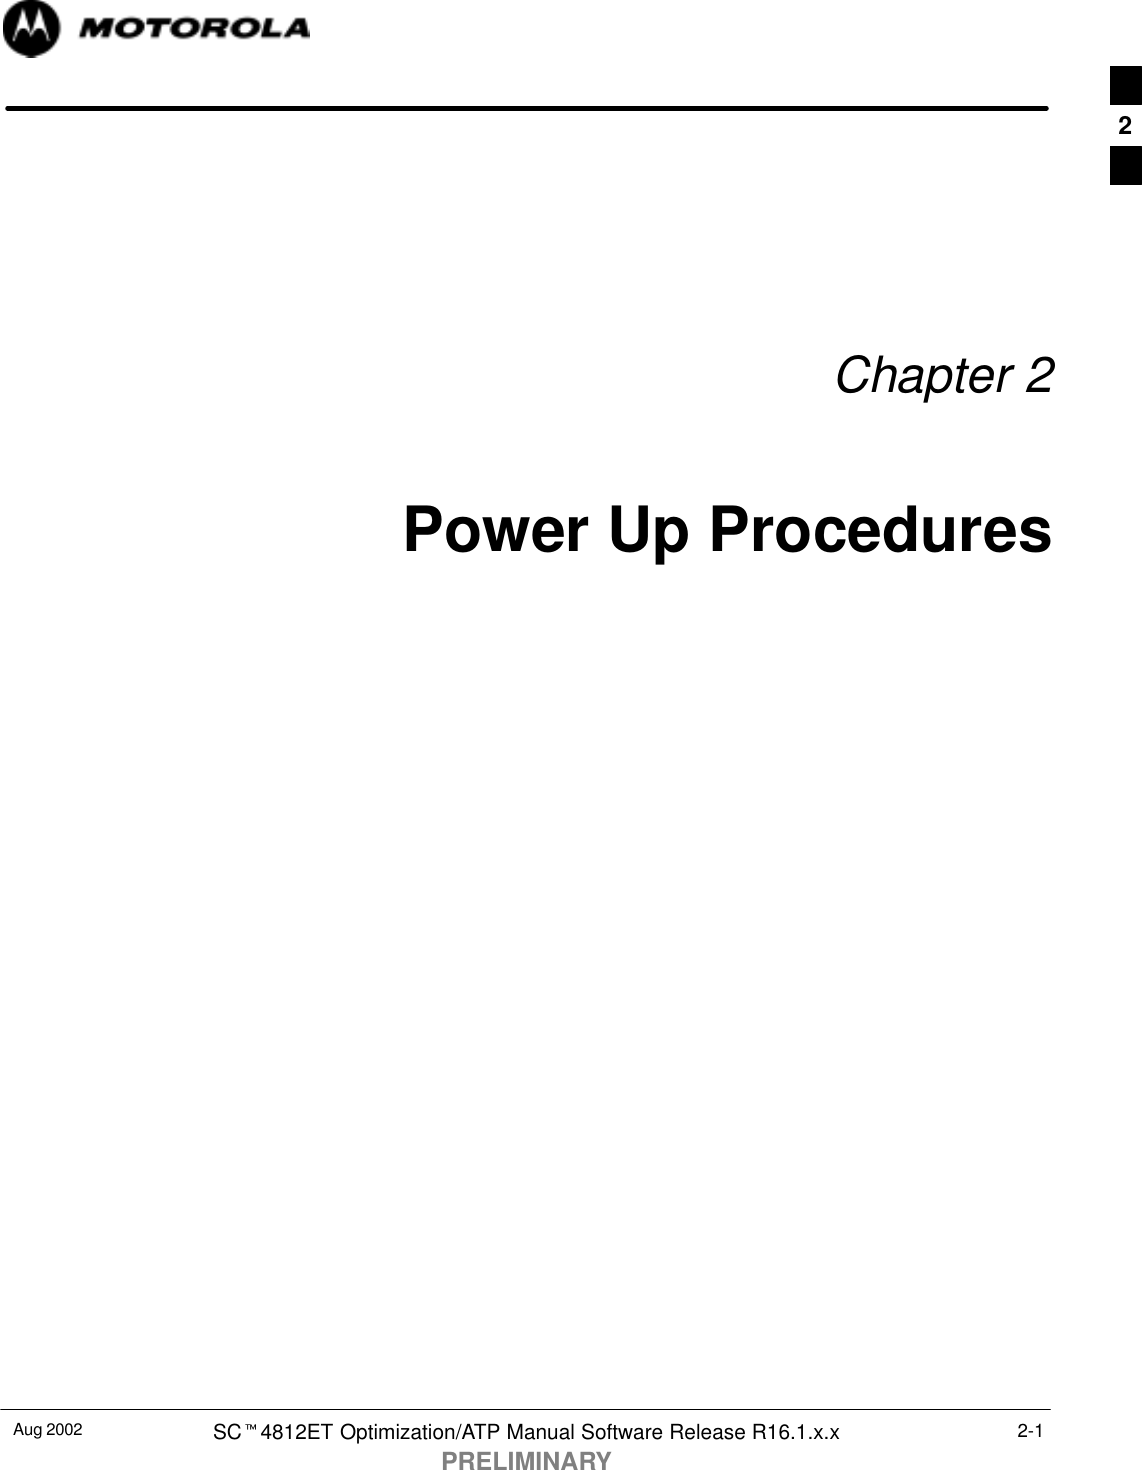 Aug 2002 SCt4812ET Optimization/ATP Manual Software Release R16.1.x.xPRELIMINARY2-1Chapter 2Power Up Procedures2